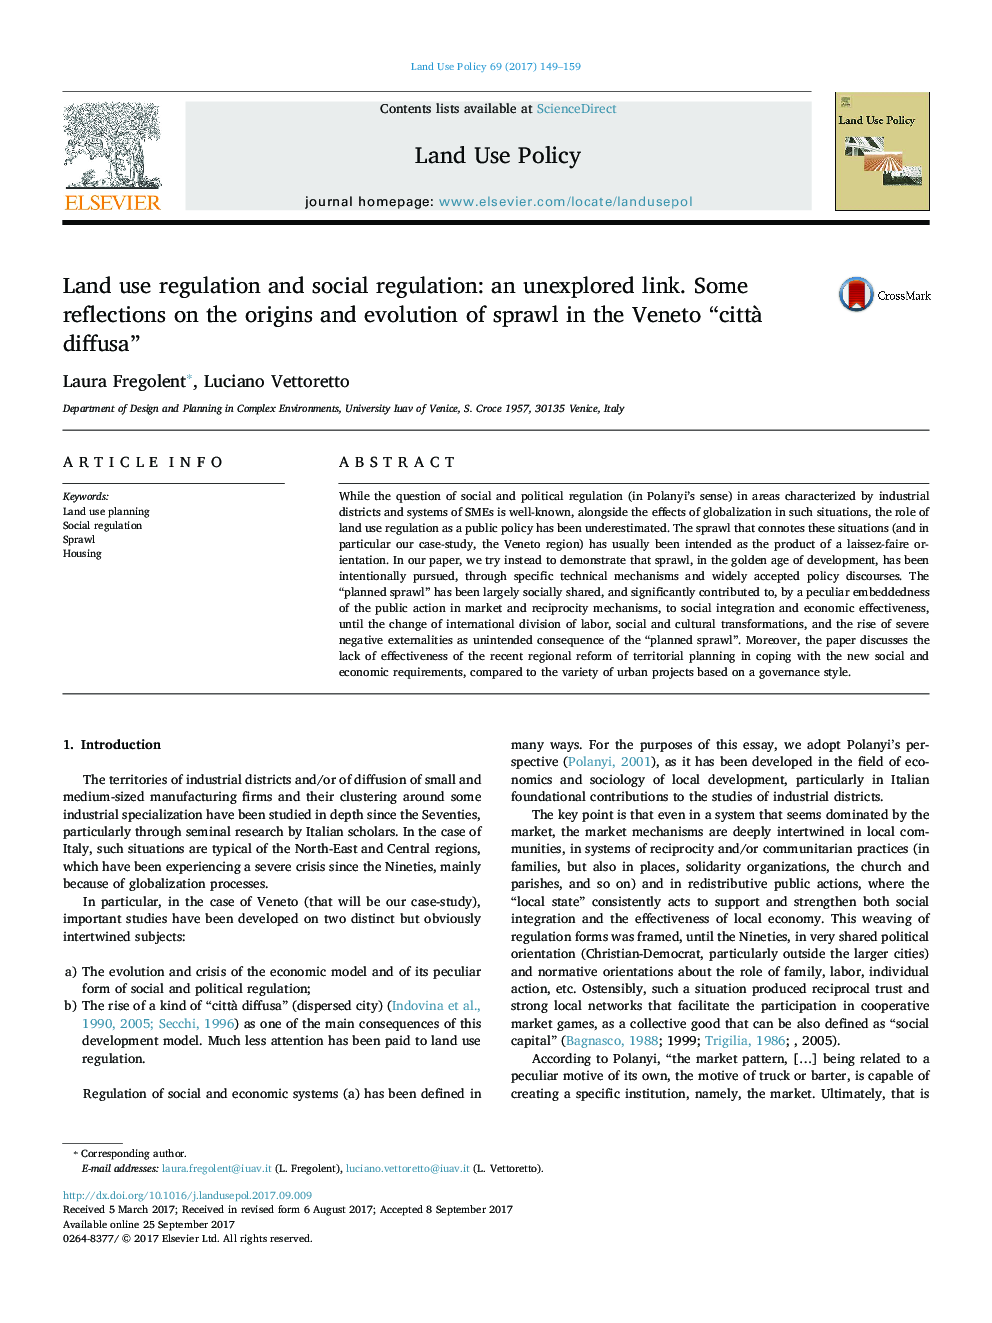 Land use regulation and social regulation: an unexplored link. Some reflections on the origins and evolution of sprawl in the Veneto “cittÃ  diffusa”